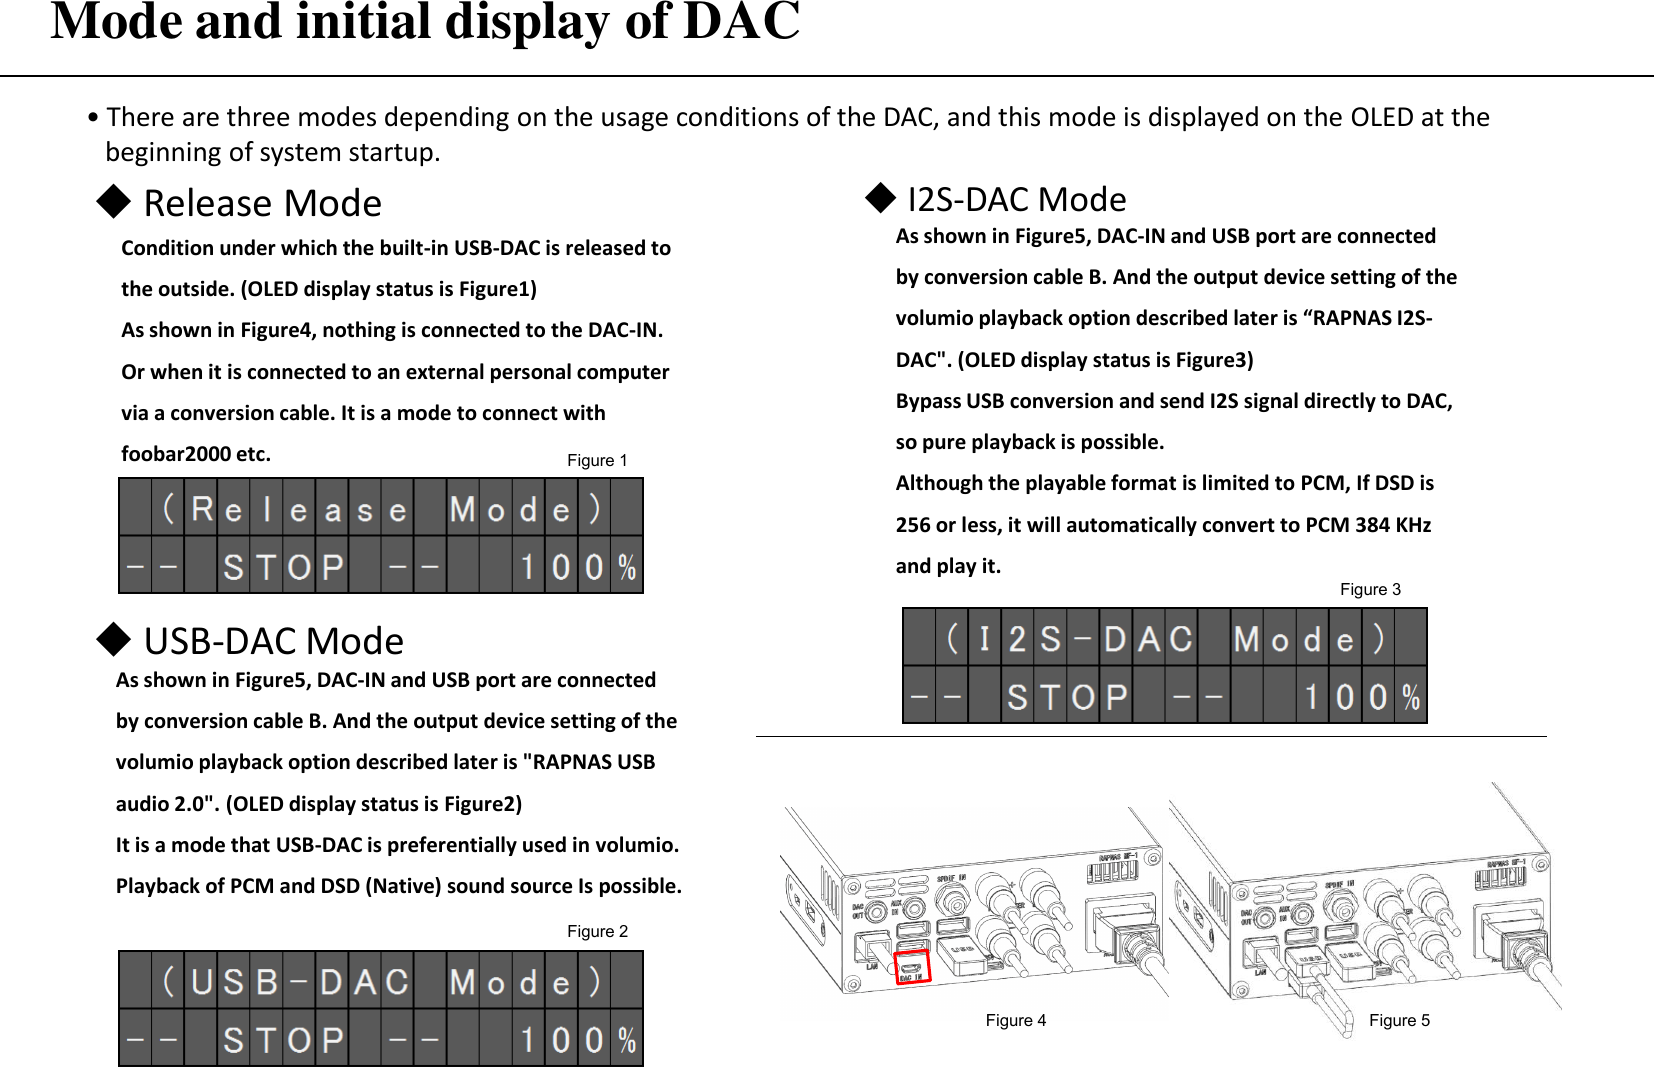 Mode and initial display of DAC • There are three modes depending on the usage conditions of the DAC, and this mode is displayed on the OLED at the      beginning of system startup. ◆ Release Mode Condition under which the built-in USB-DAC is released to the outside. (OLED display status is Figure1) As shown in Figure4, nothing is connected to the DAC-IN. Or when it is connected to an external personal computer via a conversion cable. It is a mode to connect with foobar2000 etc. ◆ USB-DAC Mode Figure 4  Figure 5 As shown in Figure5, DAC-IN and USB port are connected by conversion cable B. And the output device setting of the volumio playback option described later is &quot;RAPNAS USB audio 2.0&quot;. (OLED display status is Figure2) It is a mode that USB-DAC is preferentially used in volumio. Playback of PCM and DSD (Native) sound source Is possible. ◆ I2S-DAC Mode As shown in Figure5, DAC-IN and USB port are connected by conversion cable B. And the output device setting of the volumio playback option described later is “RAPNAS I2S-DAC&quot;. (OLED display status is Figure3) Bypass USB conversion and send I2S signal directly to DAC, so pure playback is possible. Although the playable format is limited to PCM, If DSD is 256 or less, it will automatically convert to PCM 384 KHz and play it. Figure 1 Figure 2 Figure 3 